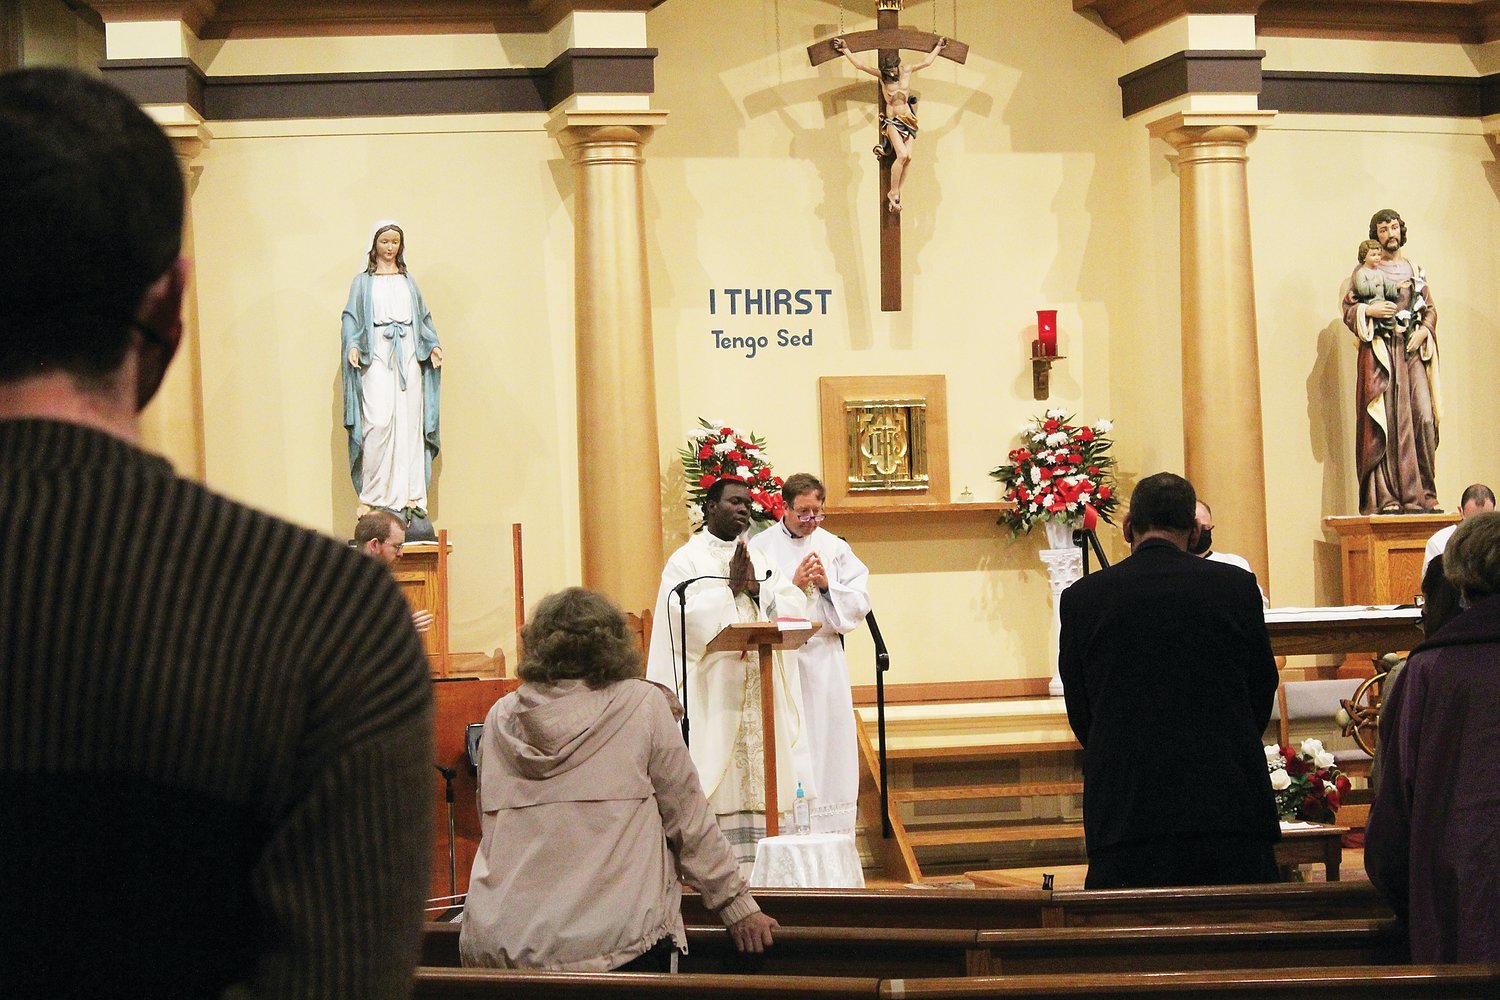 Father Joseph Brice celebrates the Mass at St. Patrick Church, Providence, assisted by Deacon Dr. Timothy Flanigan, an infectious disease specialist.